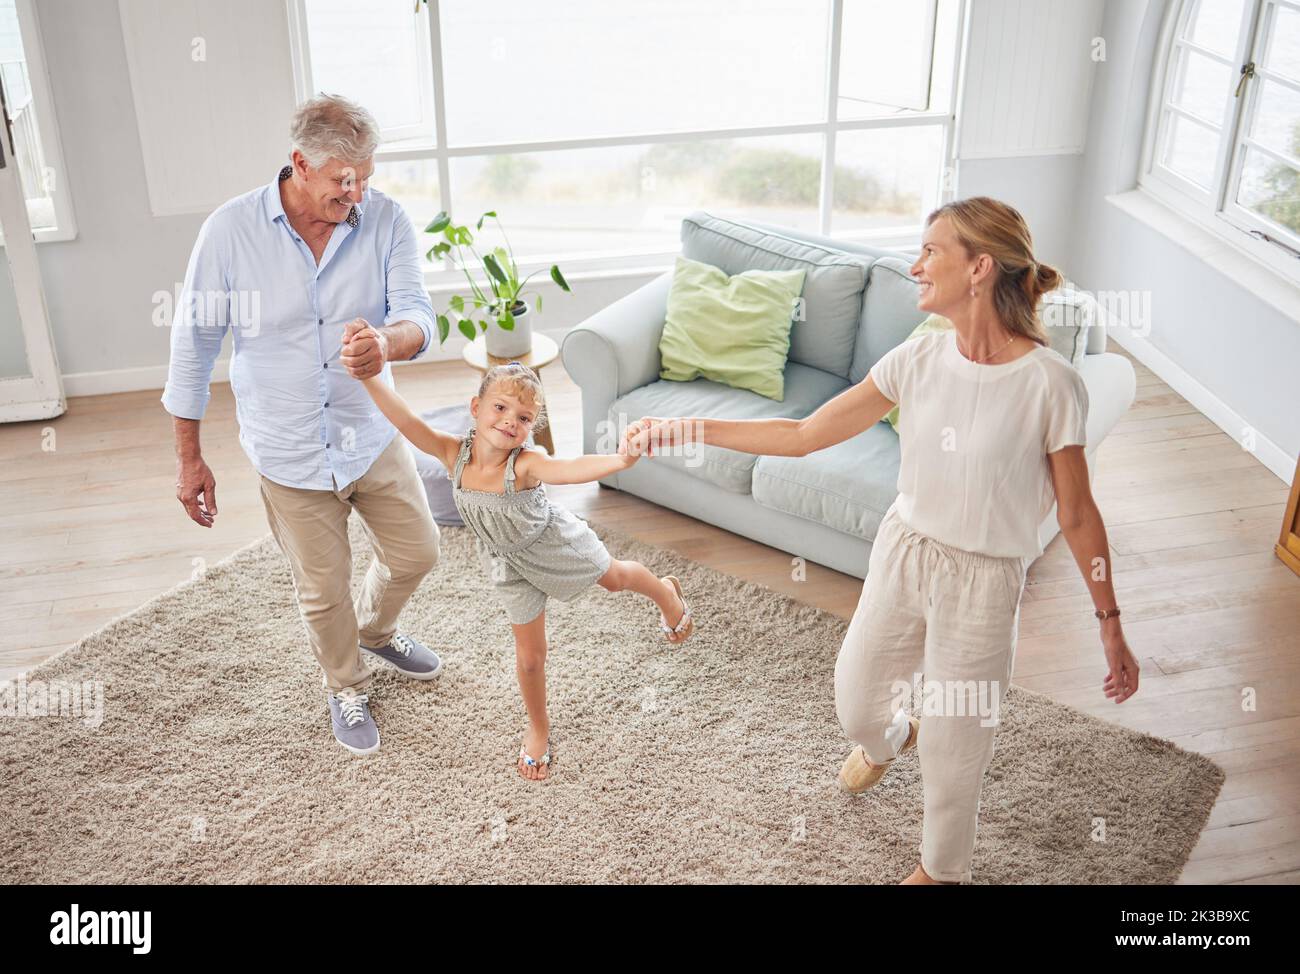 Family or grandparents dancing with child in living room for wellness, healthy body movement and growth development in retirement lifestyle. Happy Stock Photo